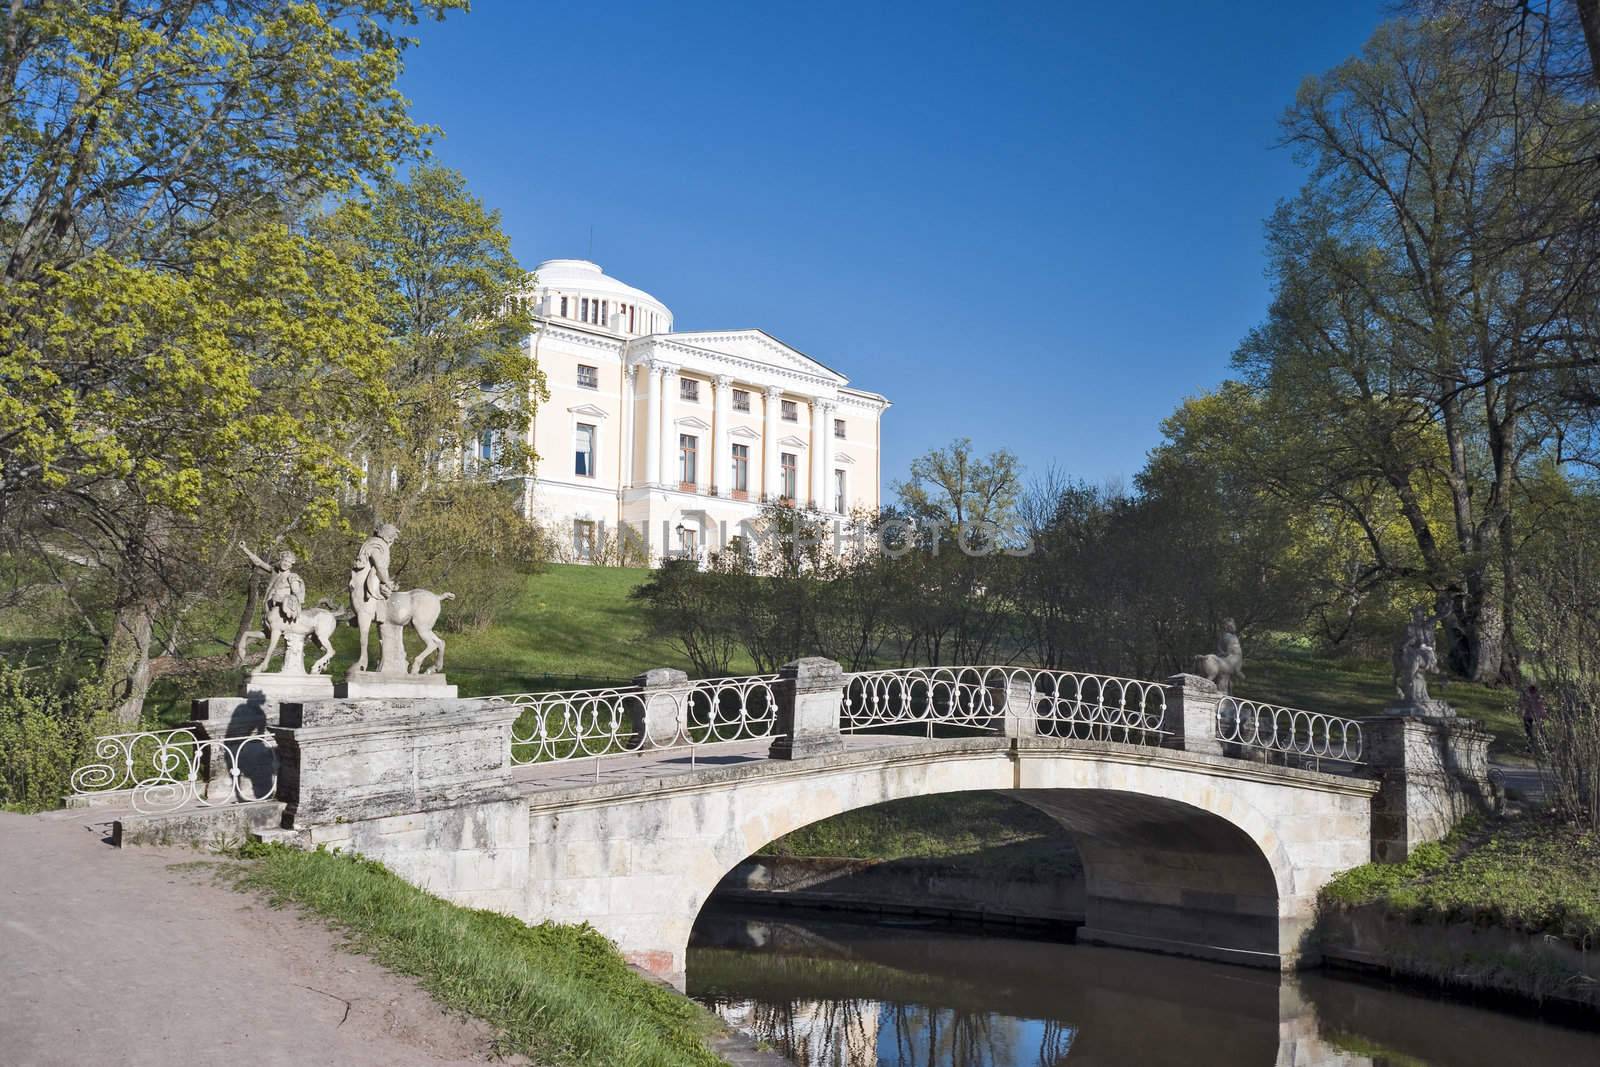 Classical building and centaurs bridge  by mulden